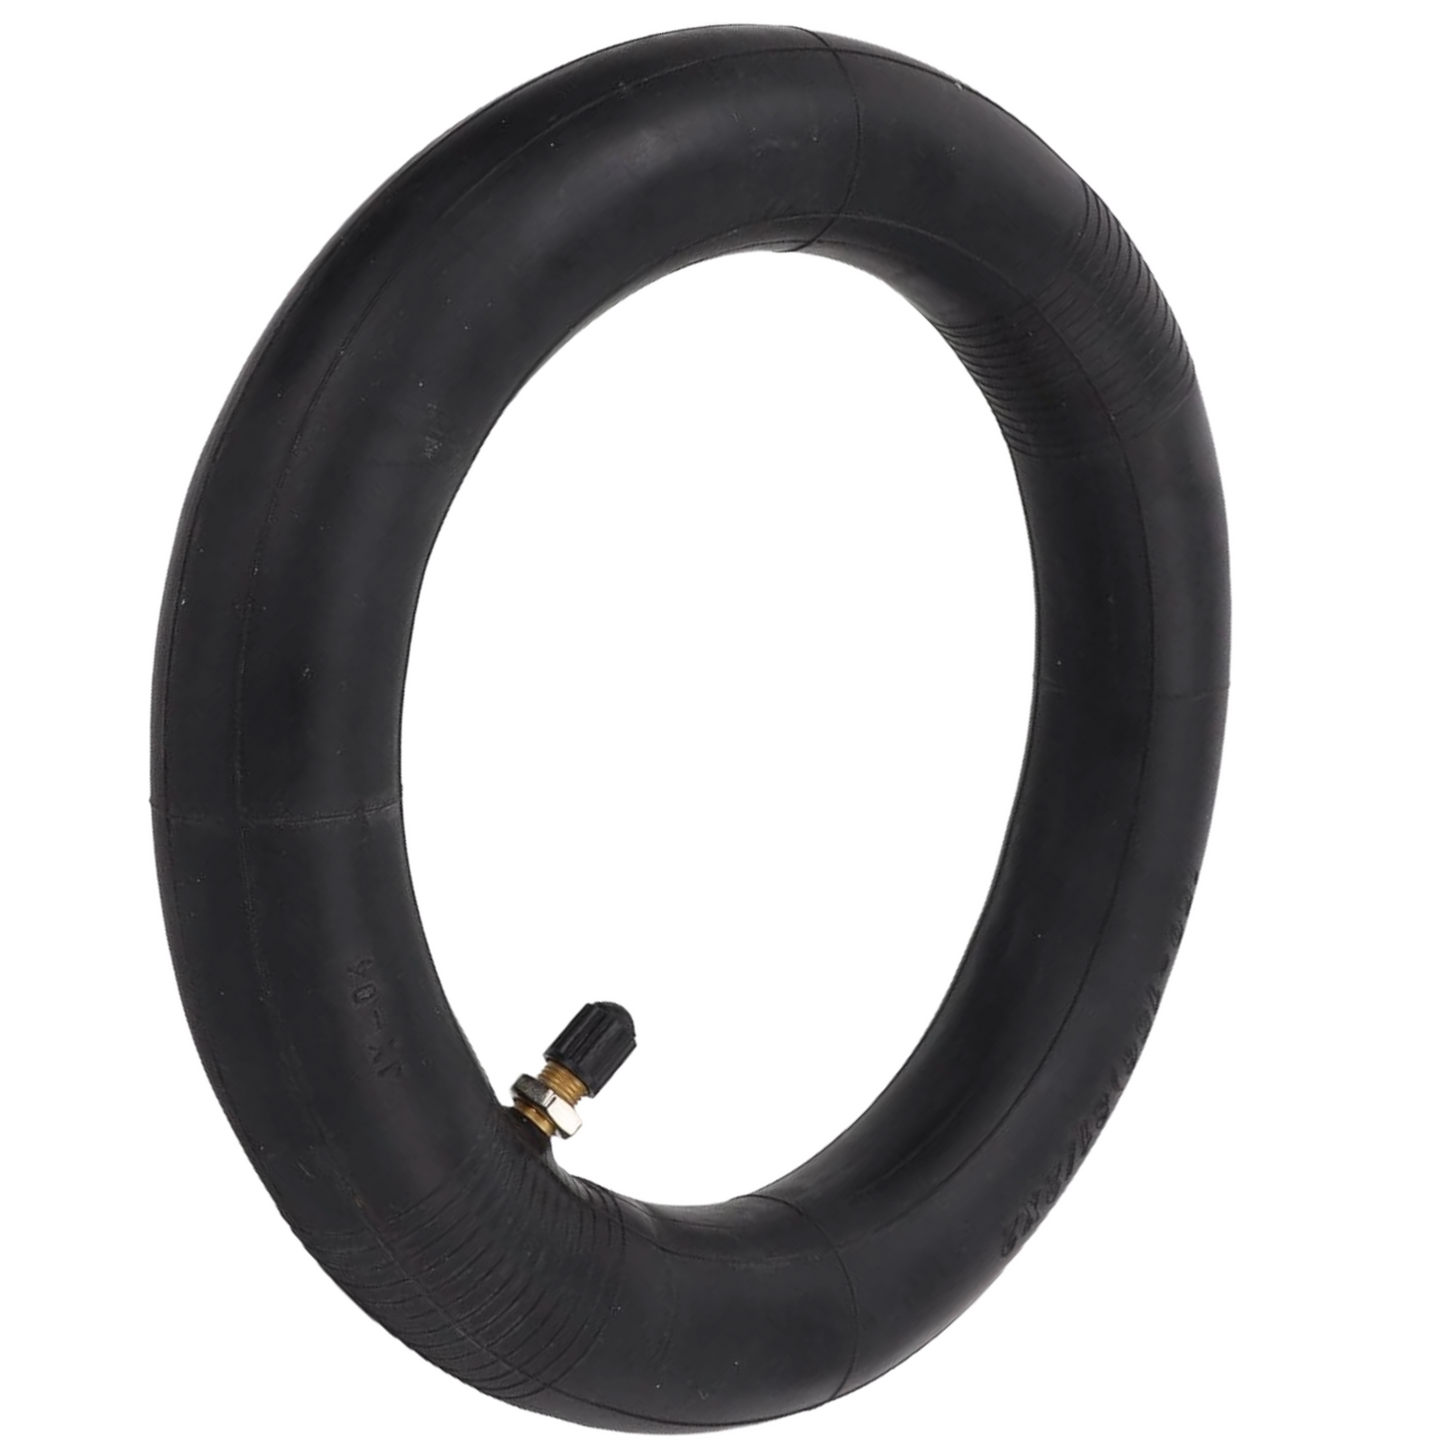 8.5x2 Inner tube Replacement E-Scooter Reinforced Straight Valve